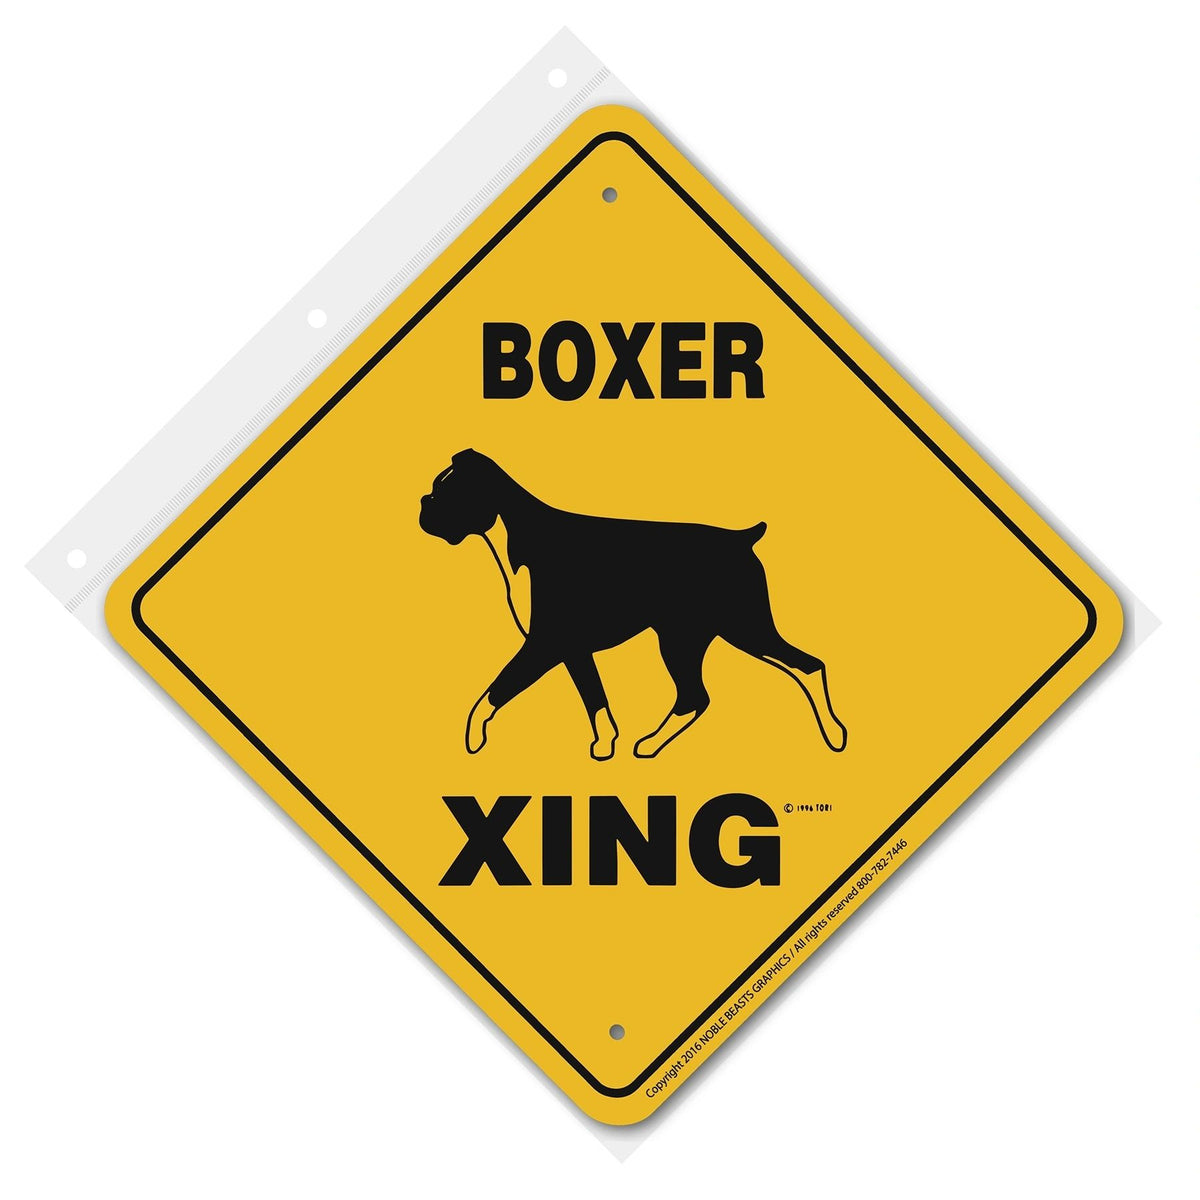 Boxer (Uncropped) Xing Sign Aluminum 12 in X 12 in #20869